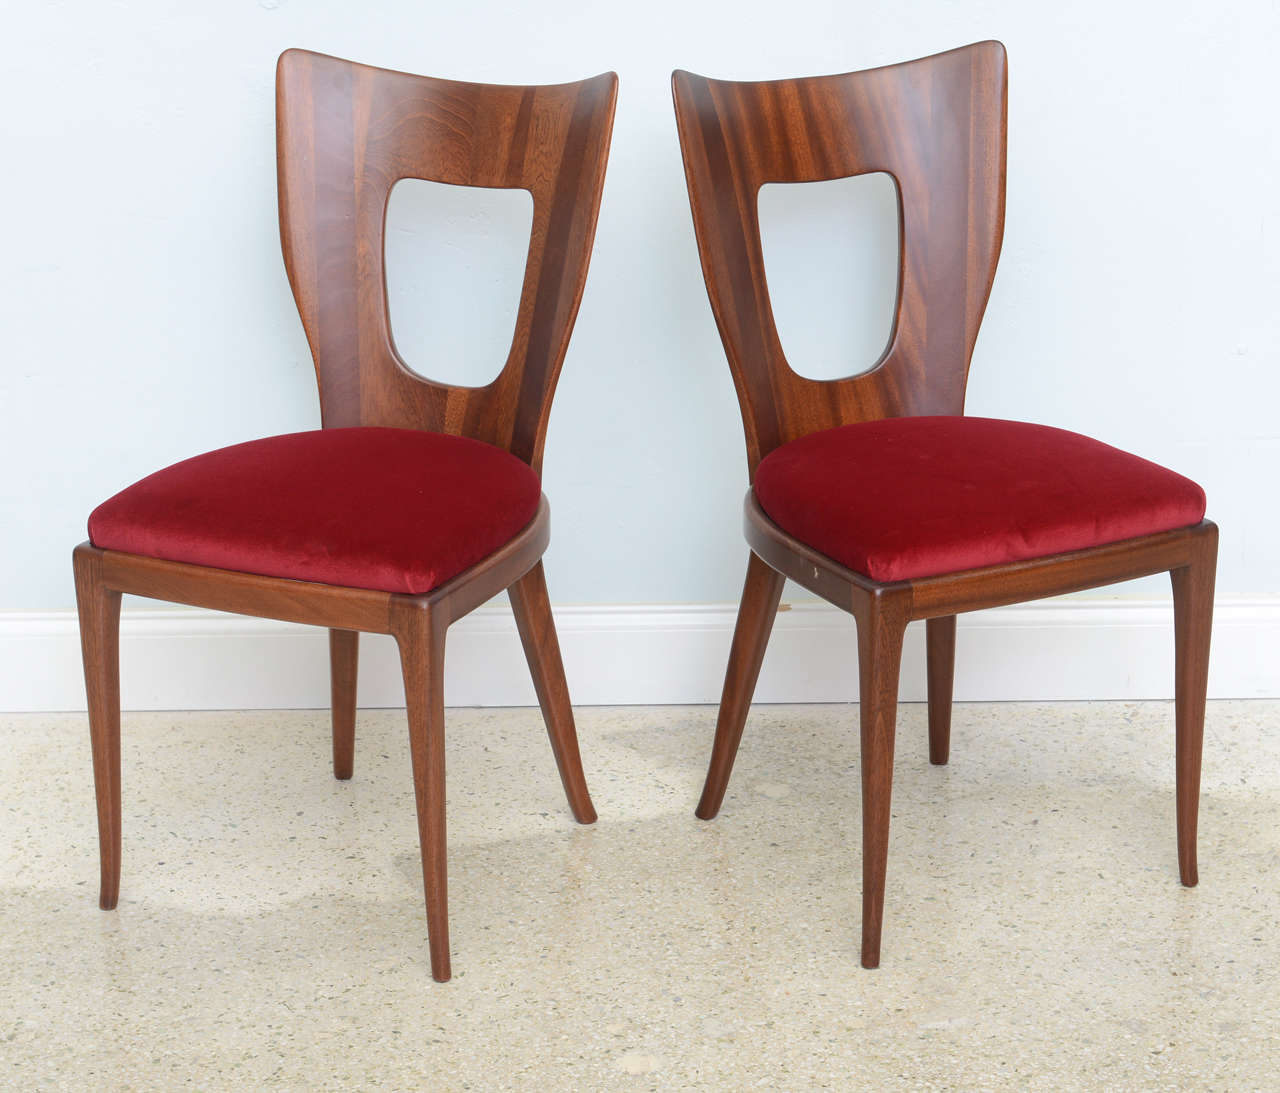 Set of 6 Italian Modern Walnut Dining Chairs, Borsani In Excellent Condition For Sale In Hollywood, FL